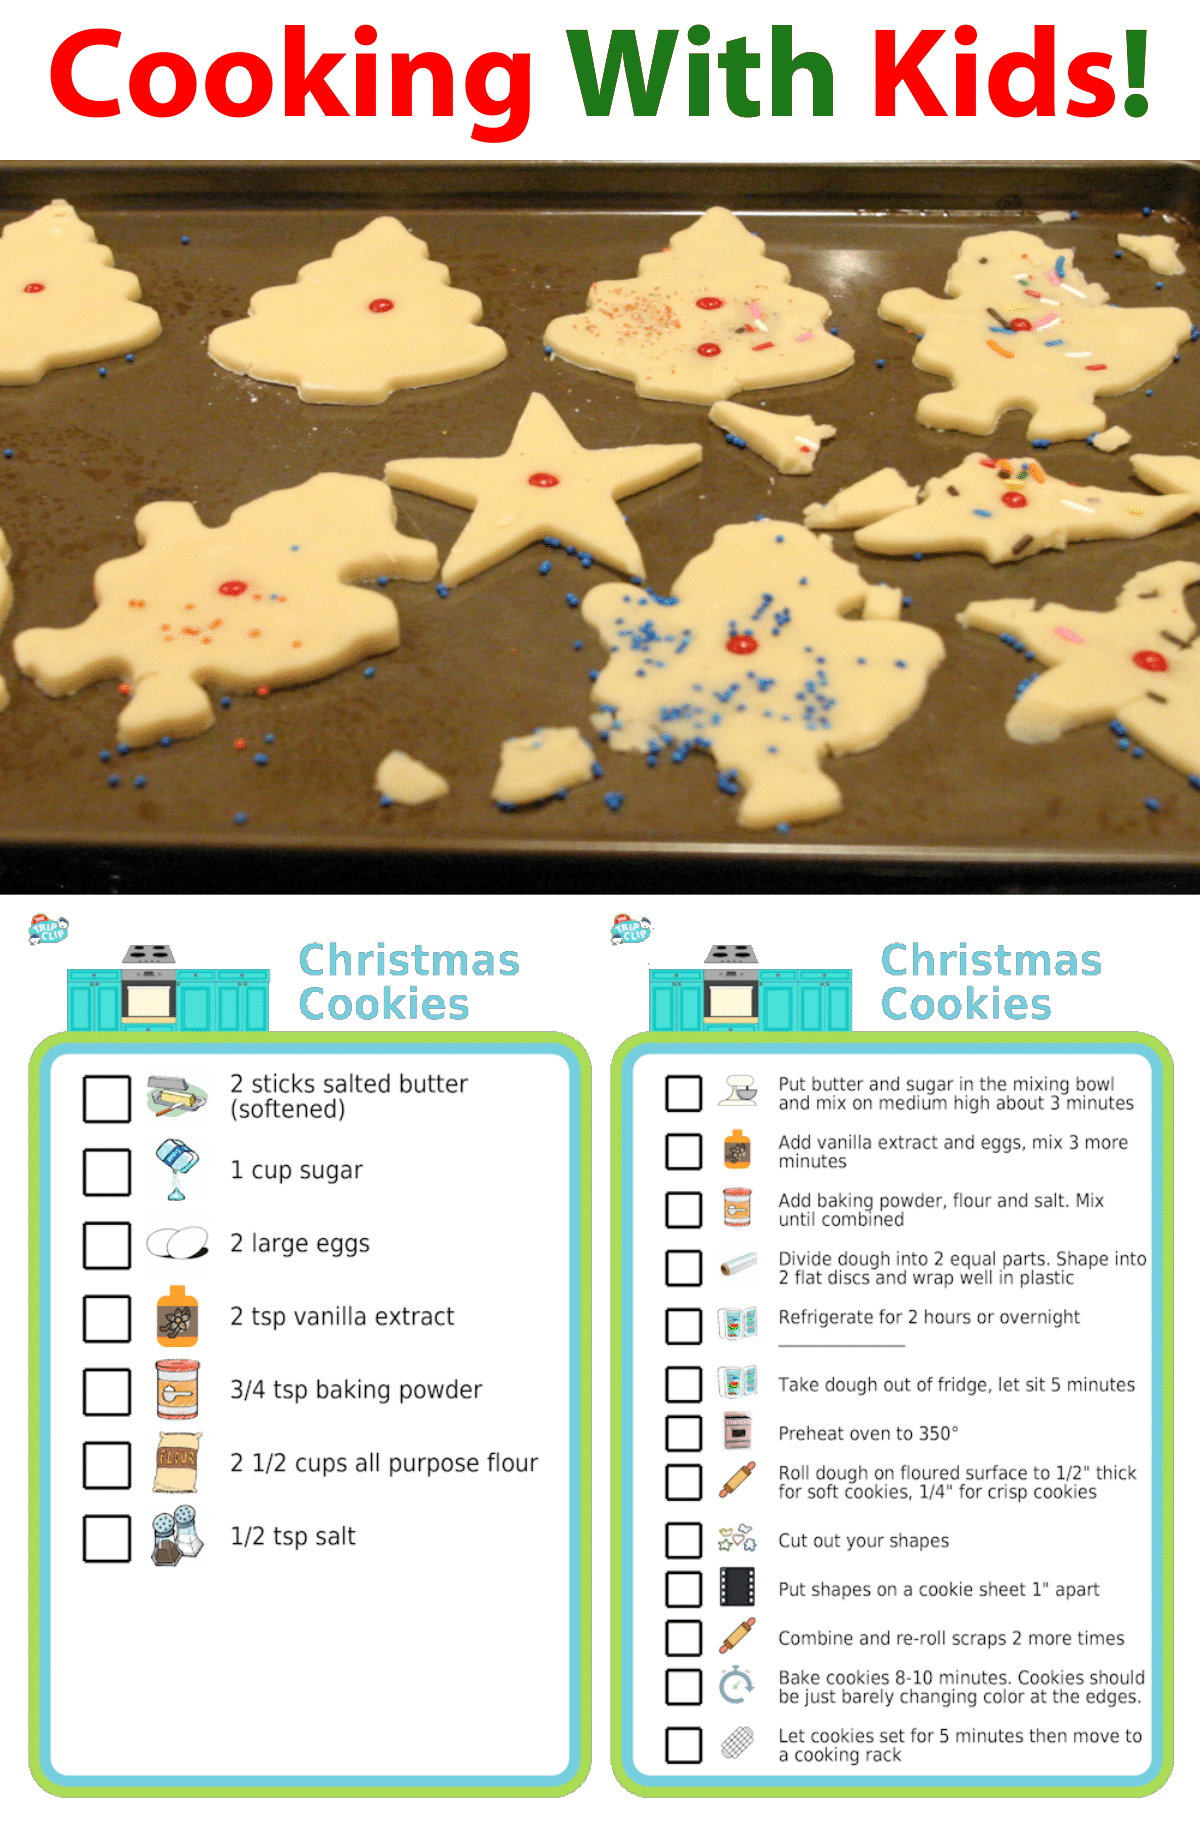 Picture checklist showing recipe for making christmas cookies